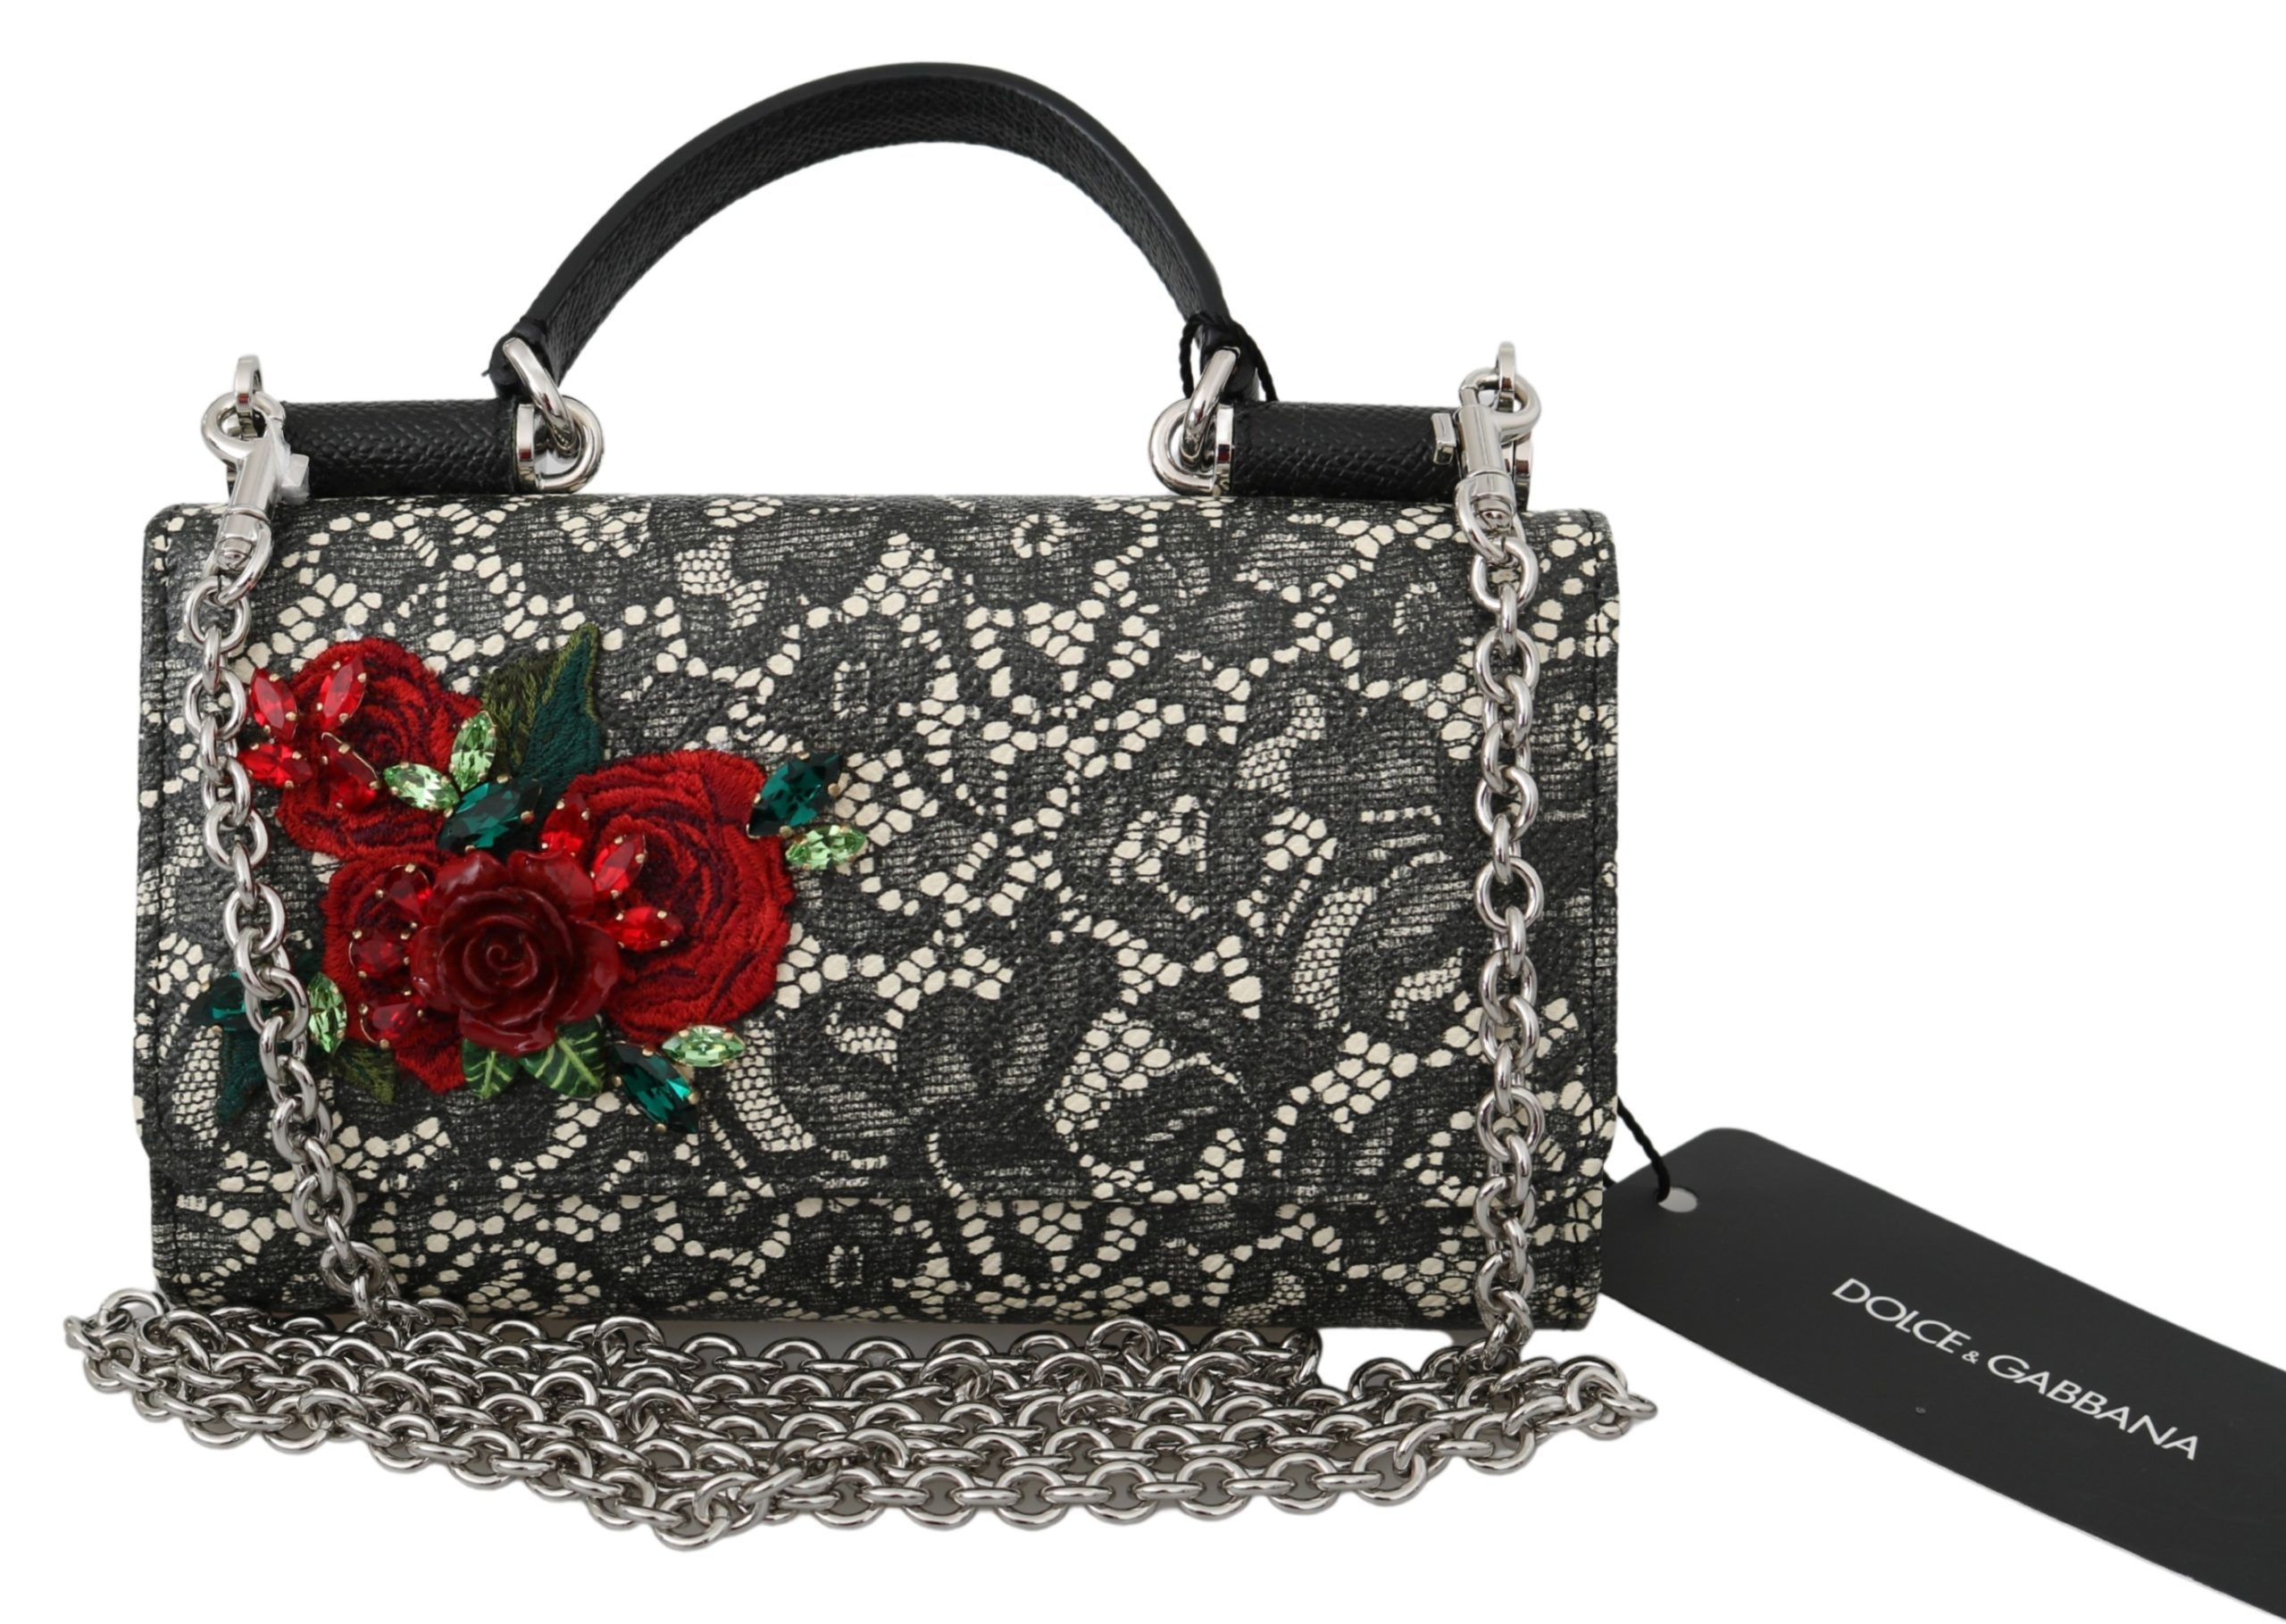 DOLCE & GABBANA
Gorgeous brand new with tags, 100% Authentic Dolce & Gabbana Women Bag.
Model: SICILY VON bag
Material: 60% Leather 20% Nylon 10% Polyester 10% Viscose
Color: Black gray white floral Lace patter
Detachable silver chain strap
Magnetic flap closure
Logo details
Made in Italy
Very exclusive and high craftsmanship
Measurements: 18cm x 10cm x 3cm
Strap: 100cm x 1cm